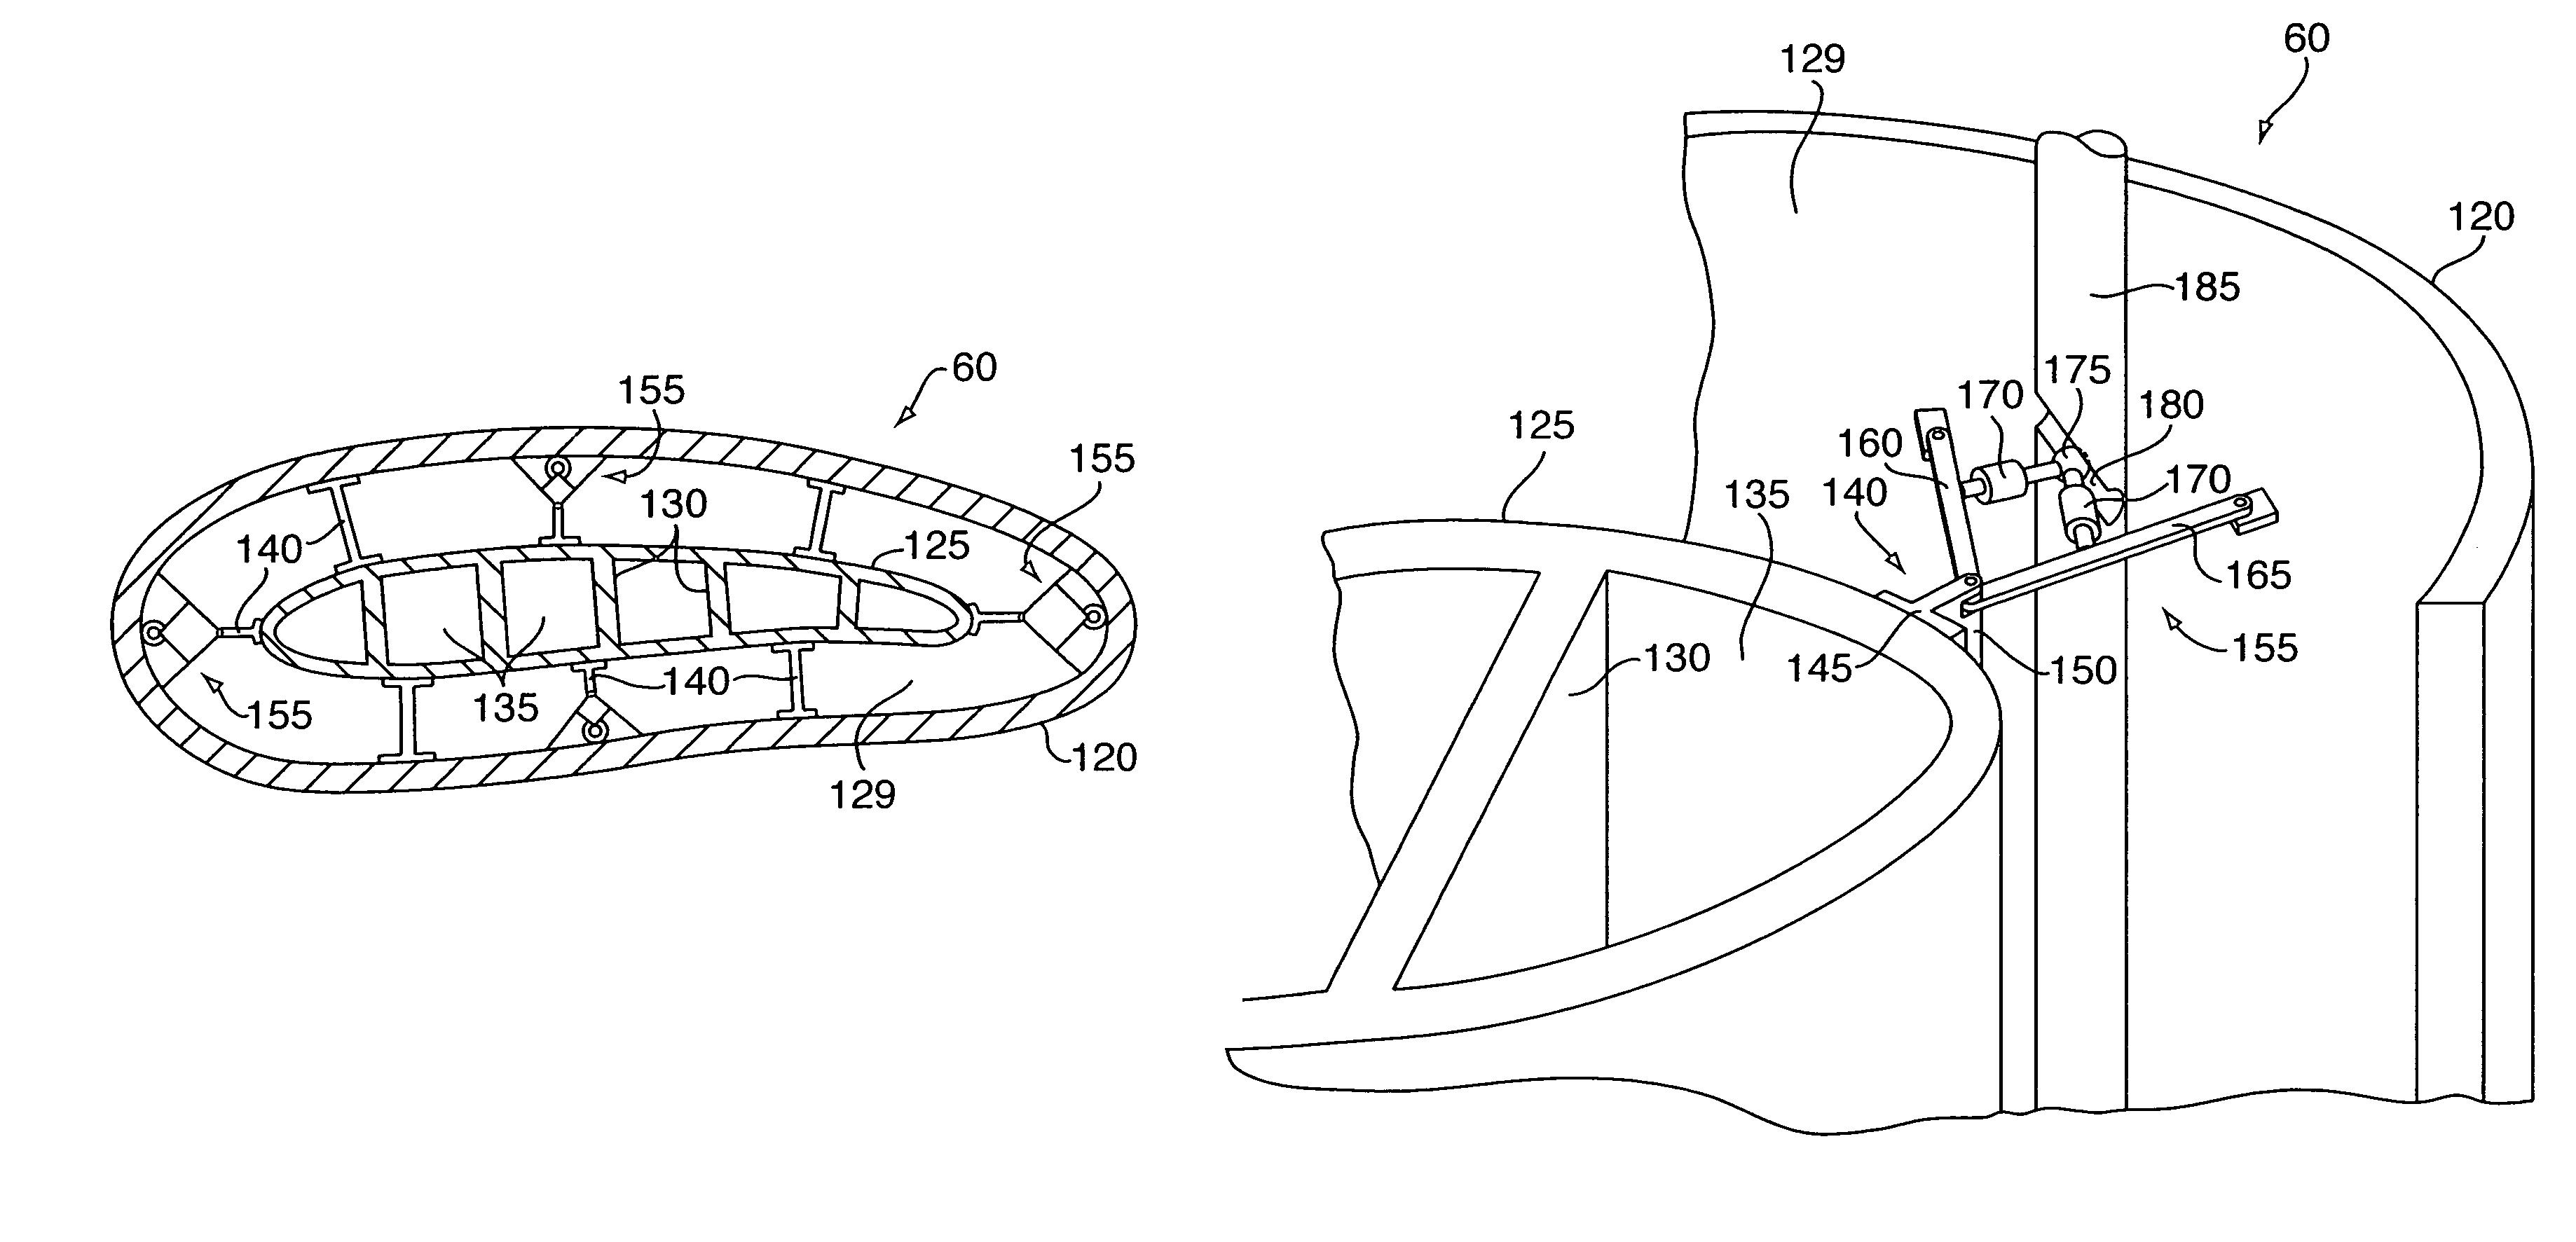 Variable geometry guide vane for a gas turbine engine